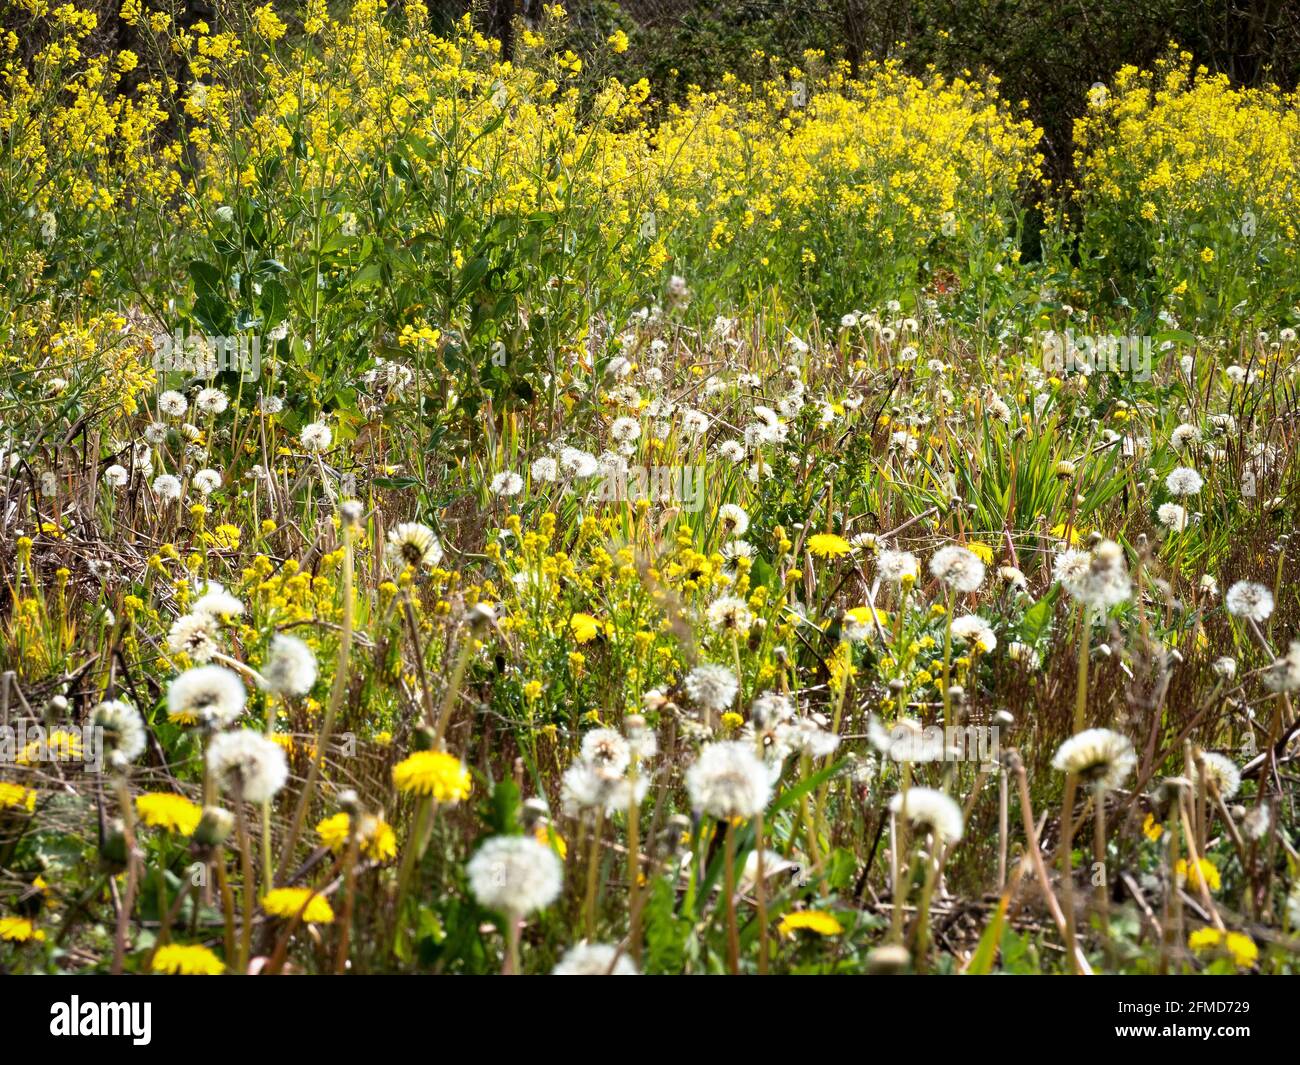 'Rewilded' meadow in a former arable field in Somerset UK containing  variety of common wildflowers and reseeded brassicas attracting bees and insects Stock Photo